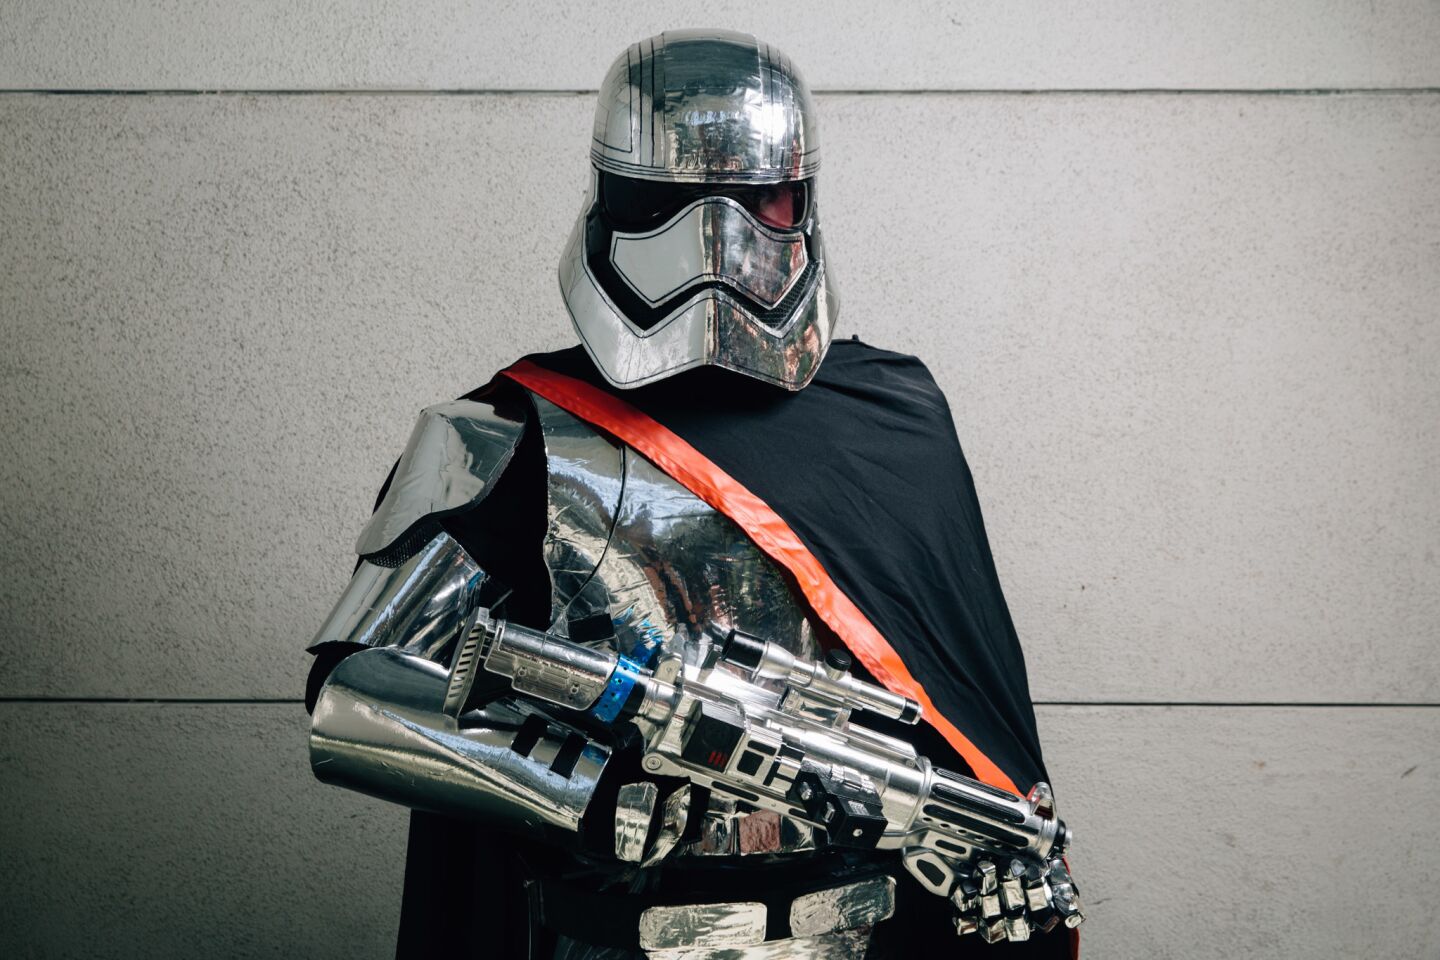 Emily Christiansen, 21, of Lake Forest, cosplays as Capt. Phasma from the “Star Wars” universe of films.